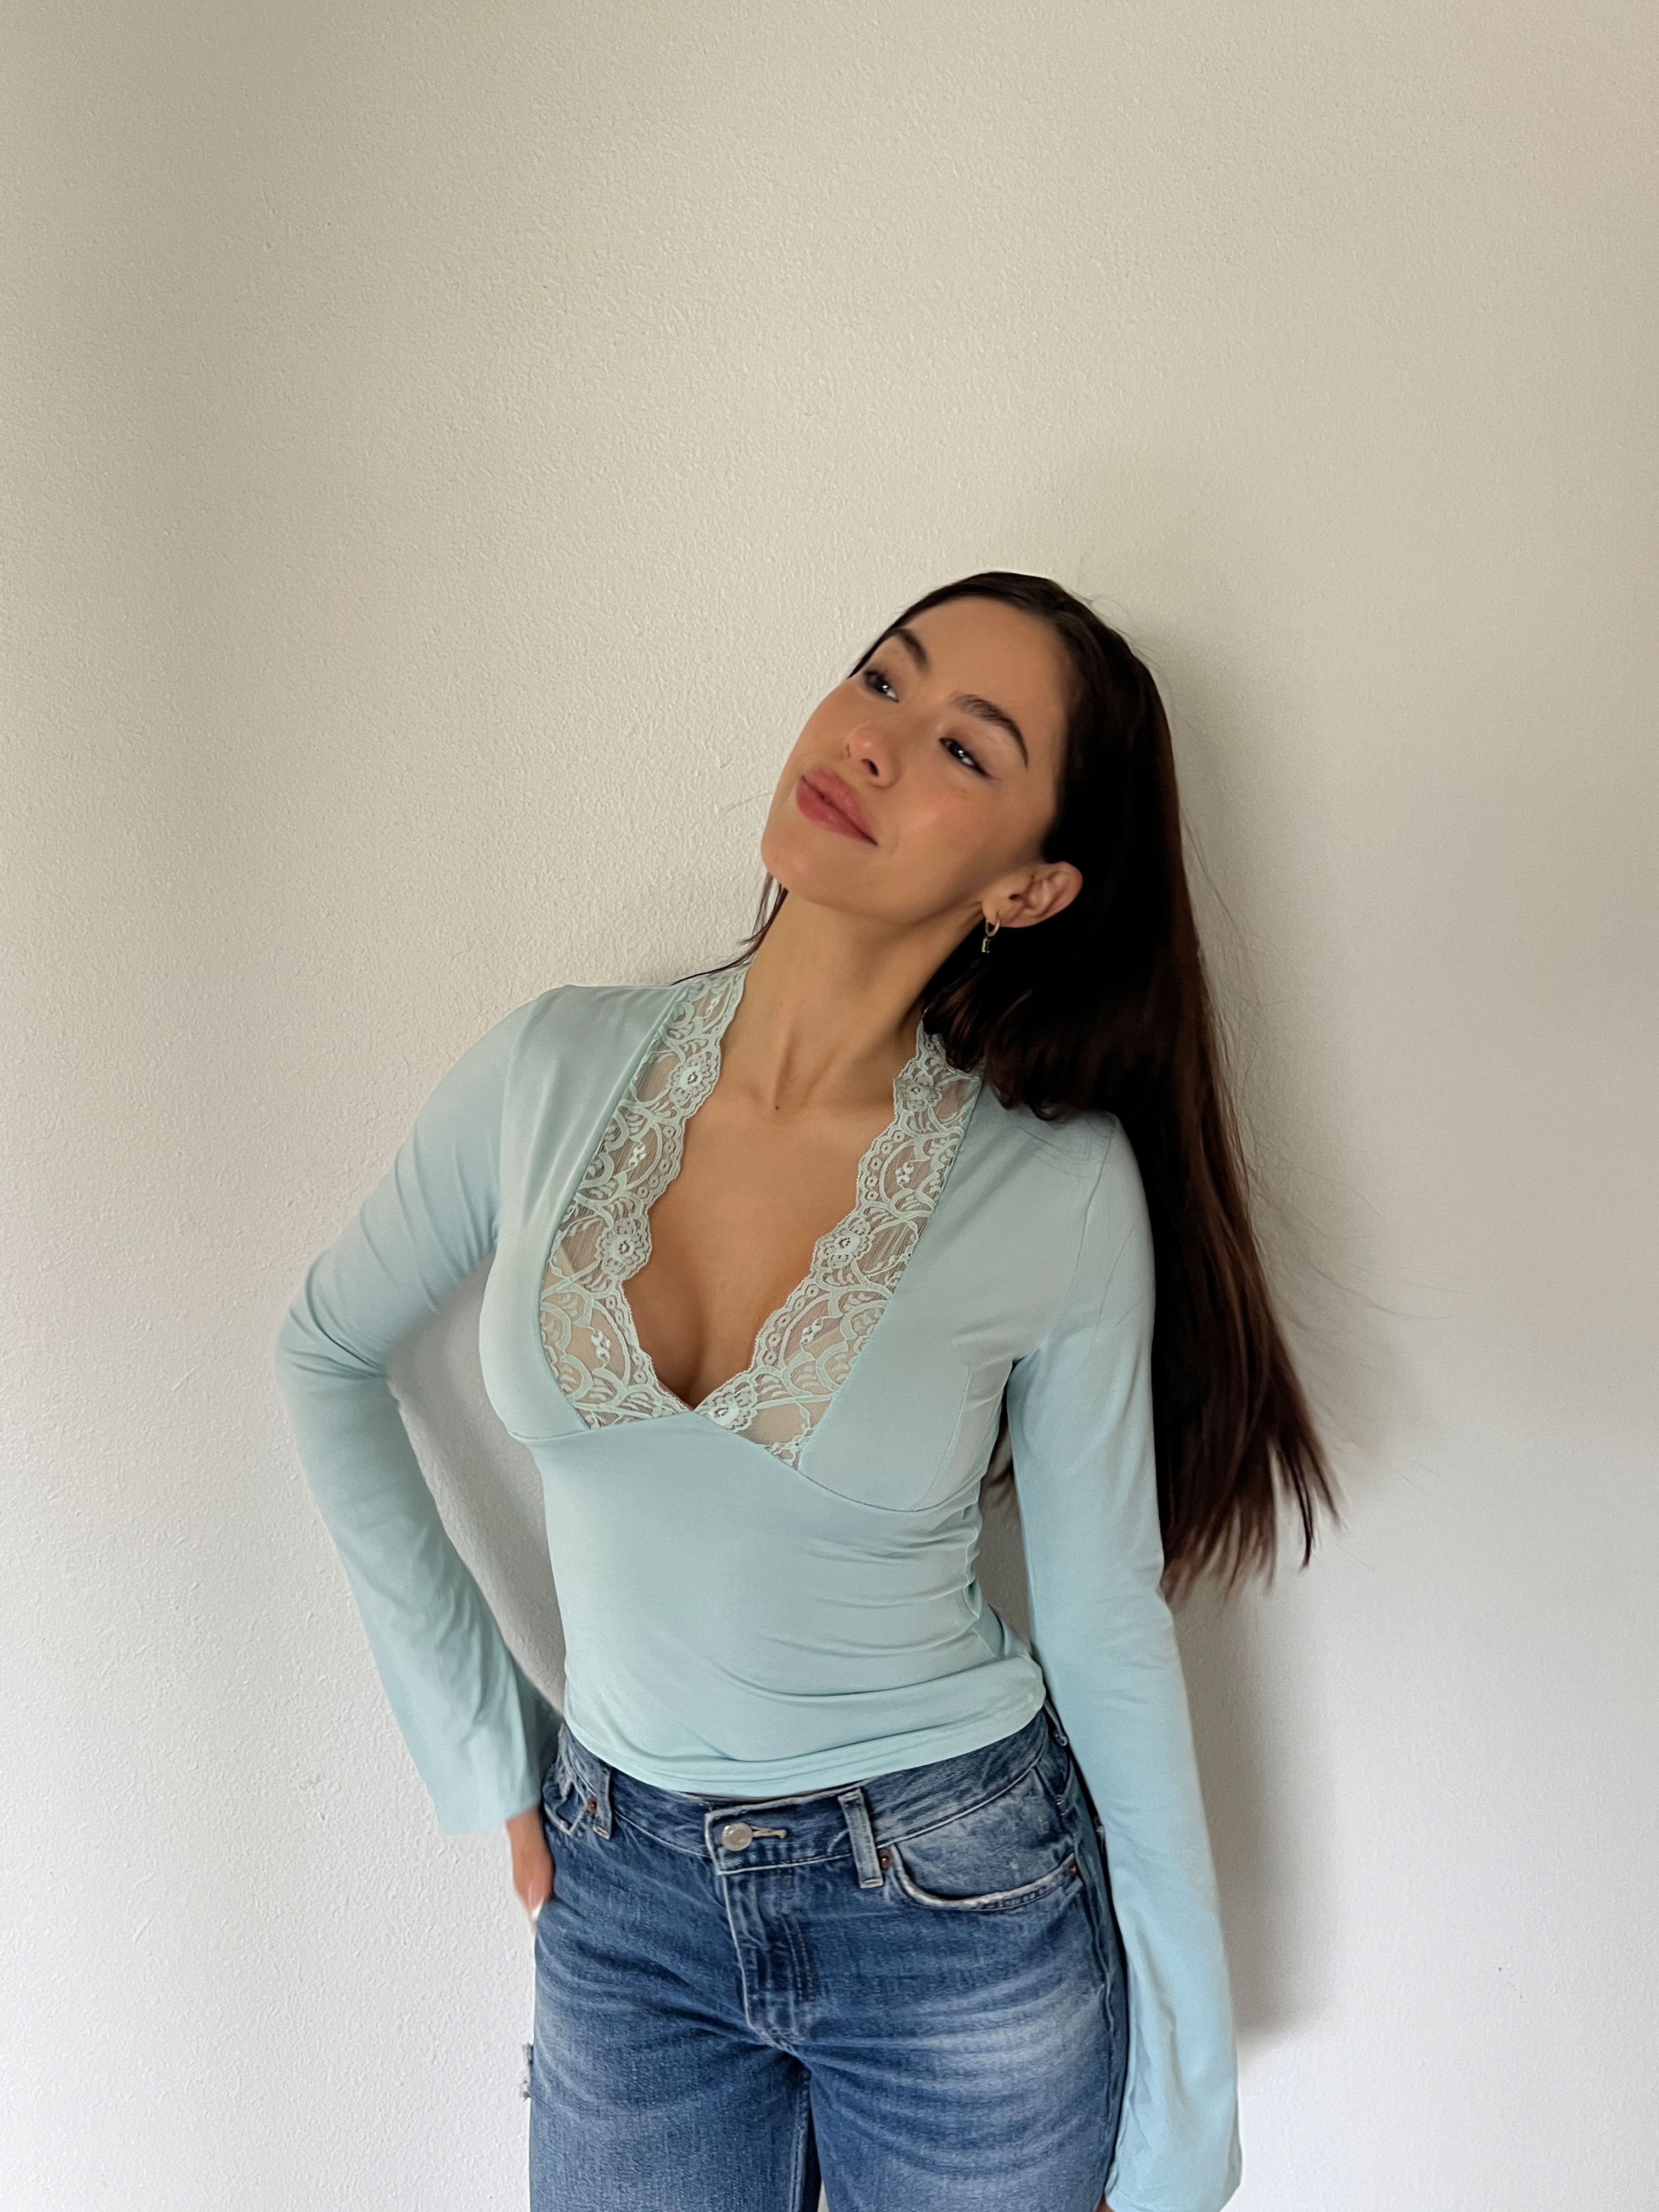 Veyles's Lace Top Perfect Fit Baby blue